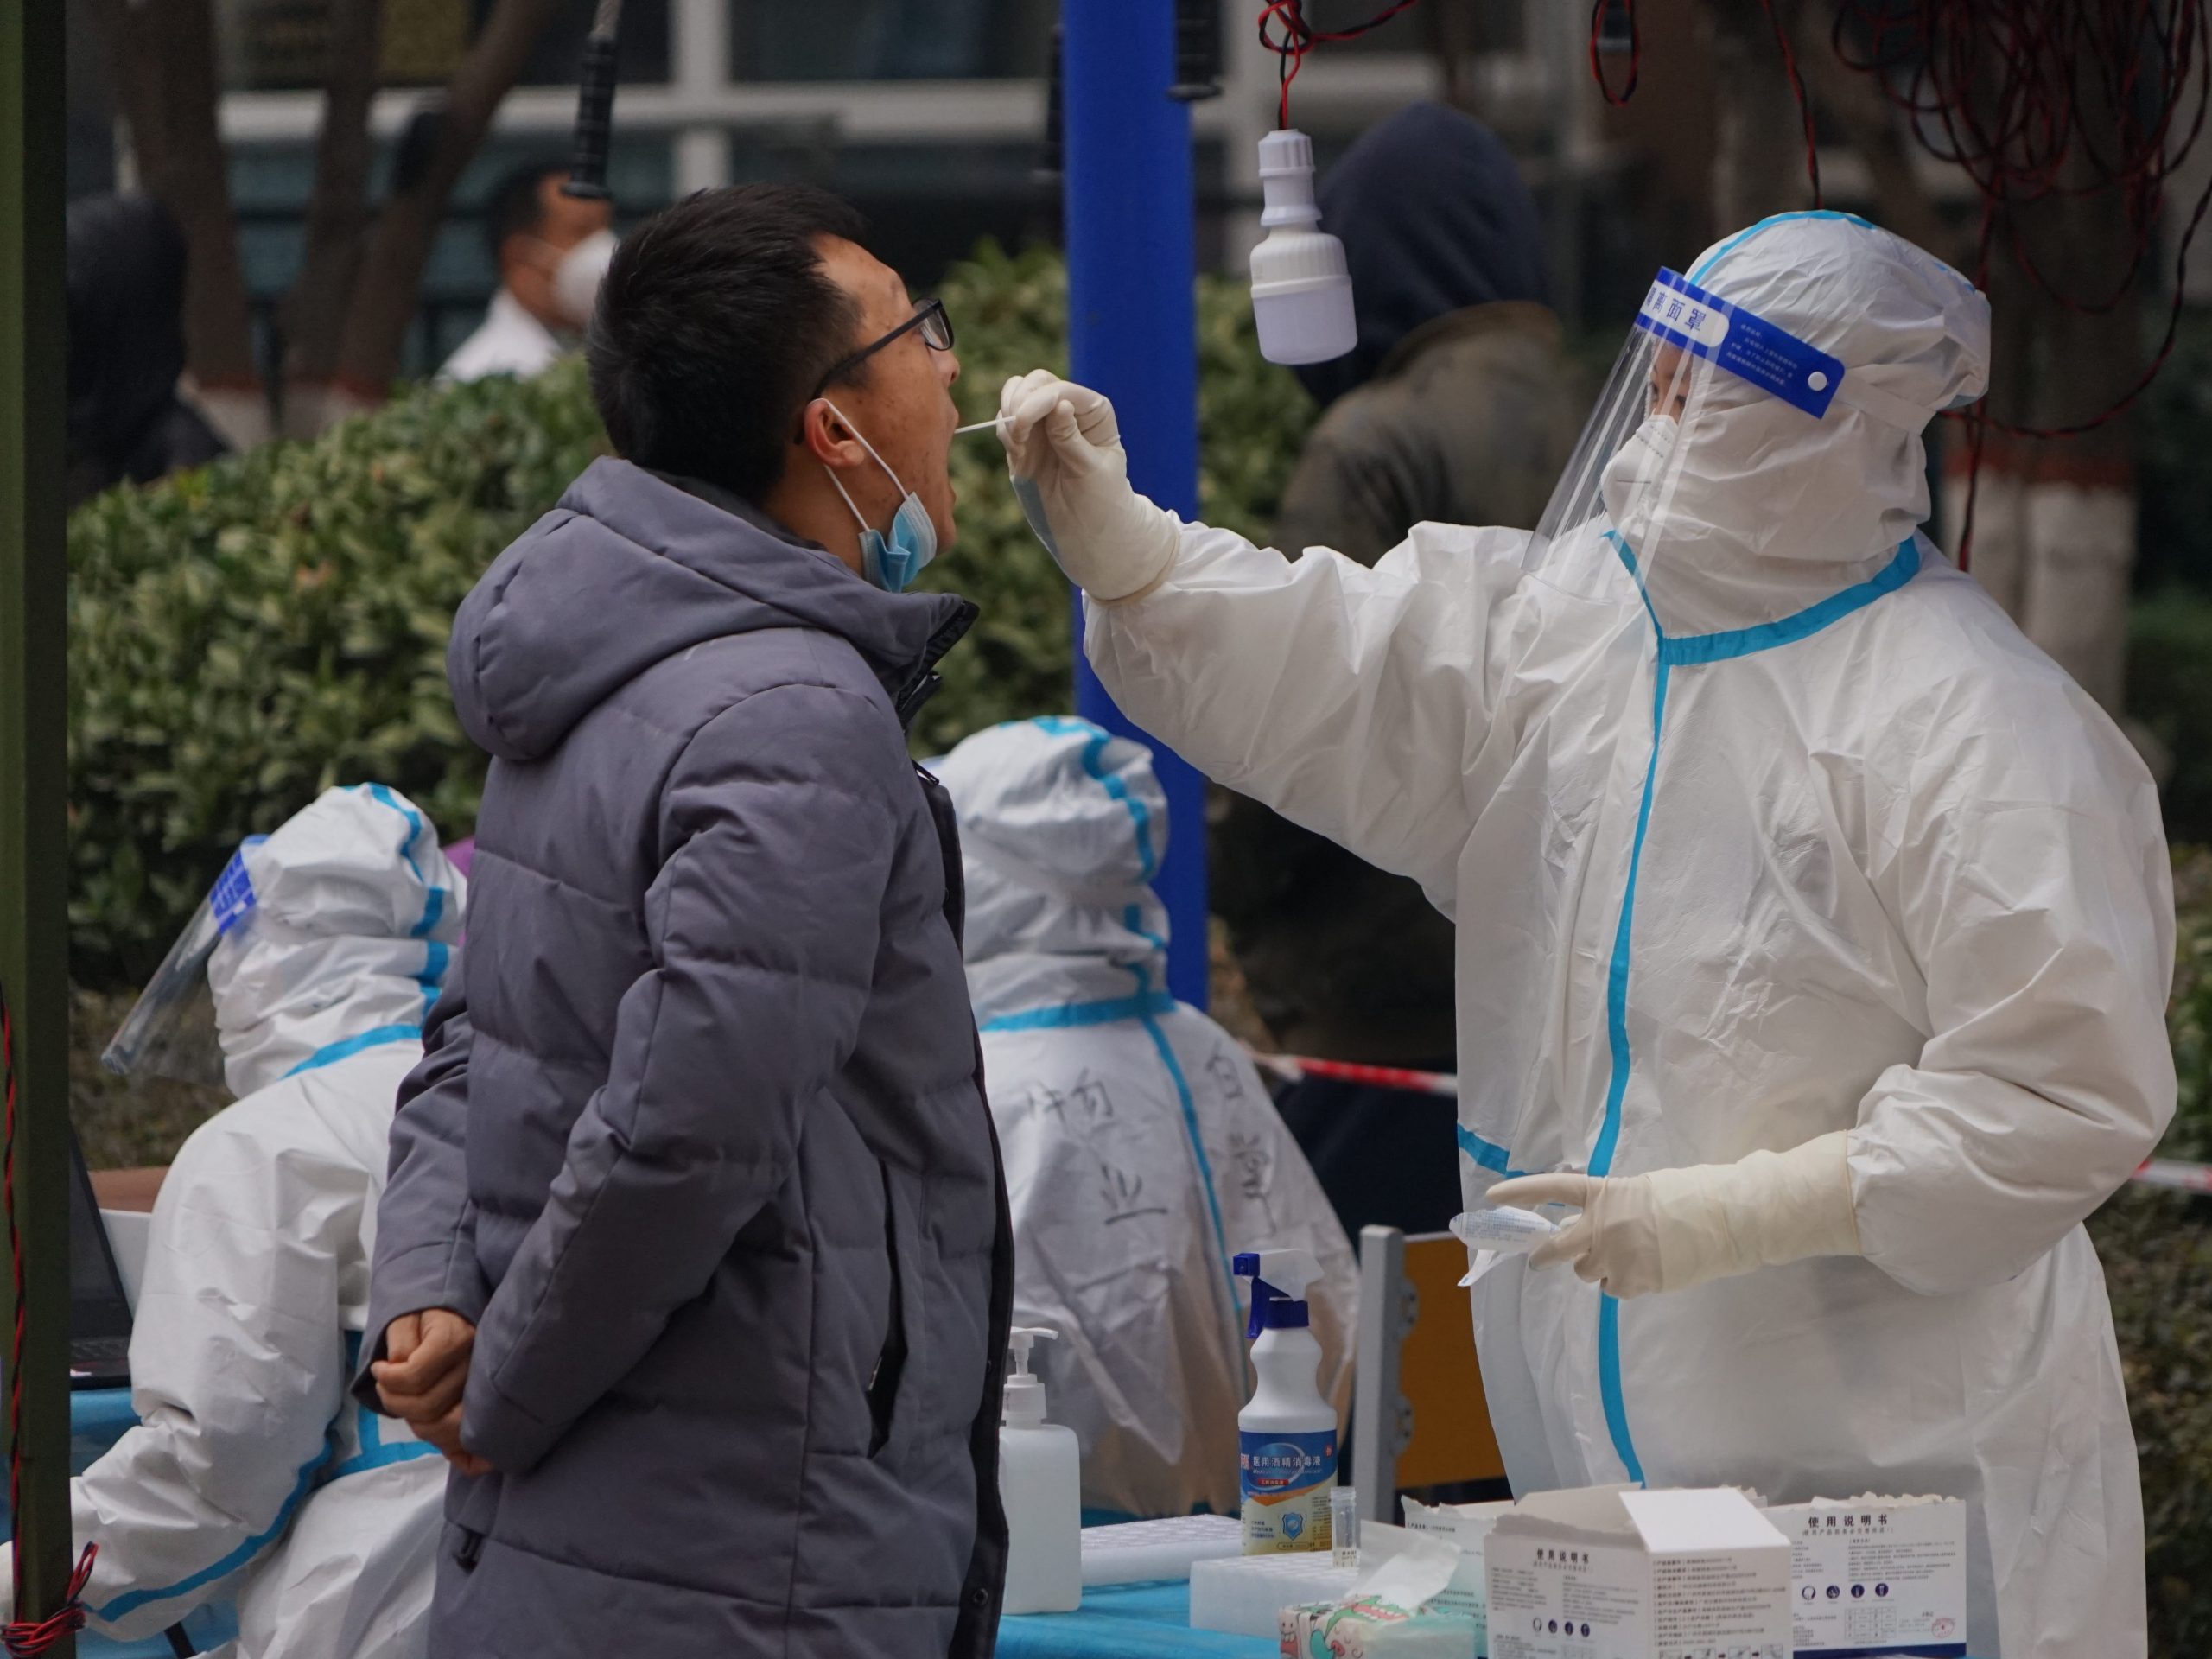 A man in full protective gear (R) administers a COVID-19 nucleic acid test to a Xi'an resident (L) dressed in a grey jacket.